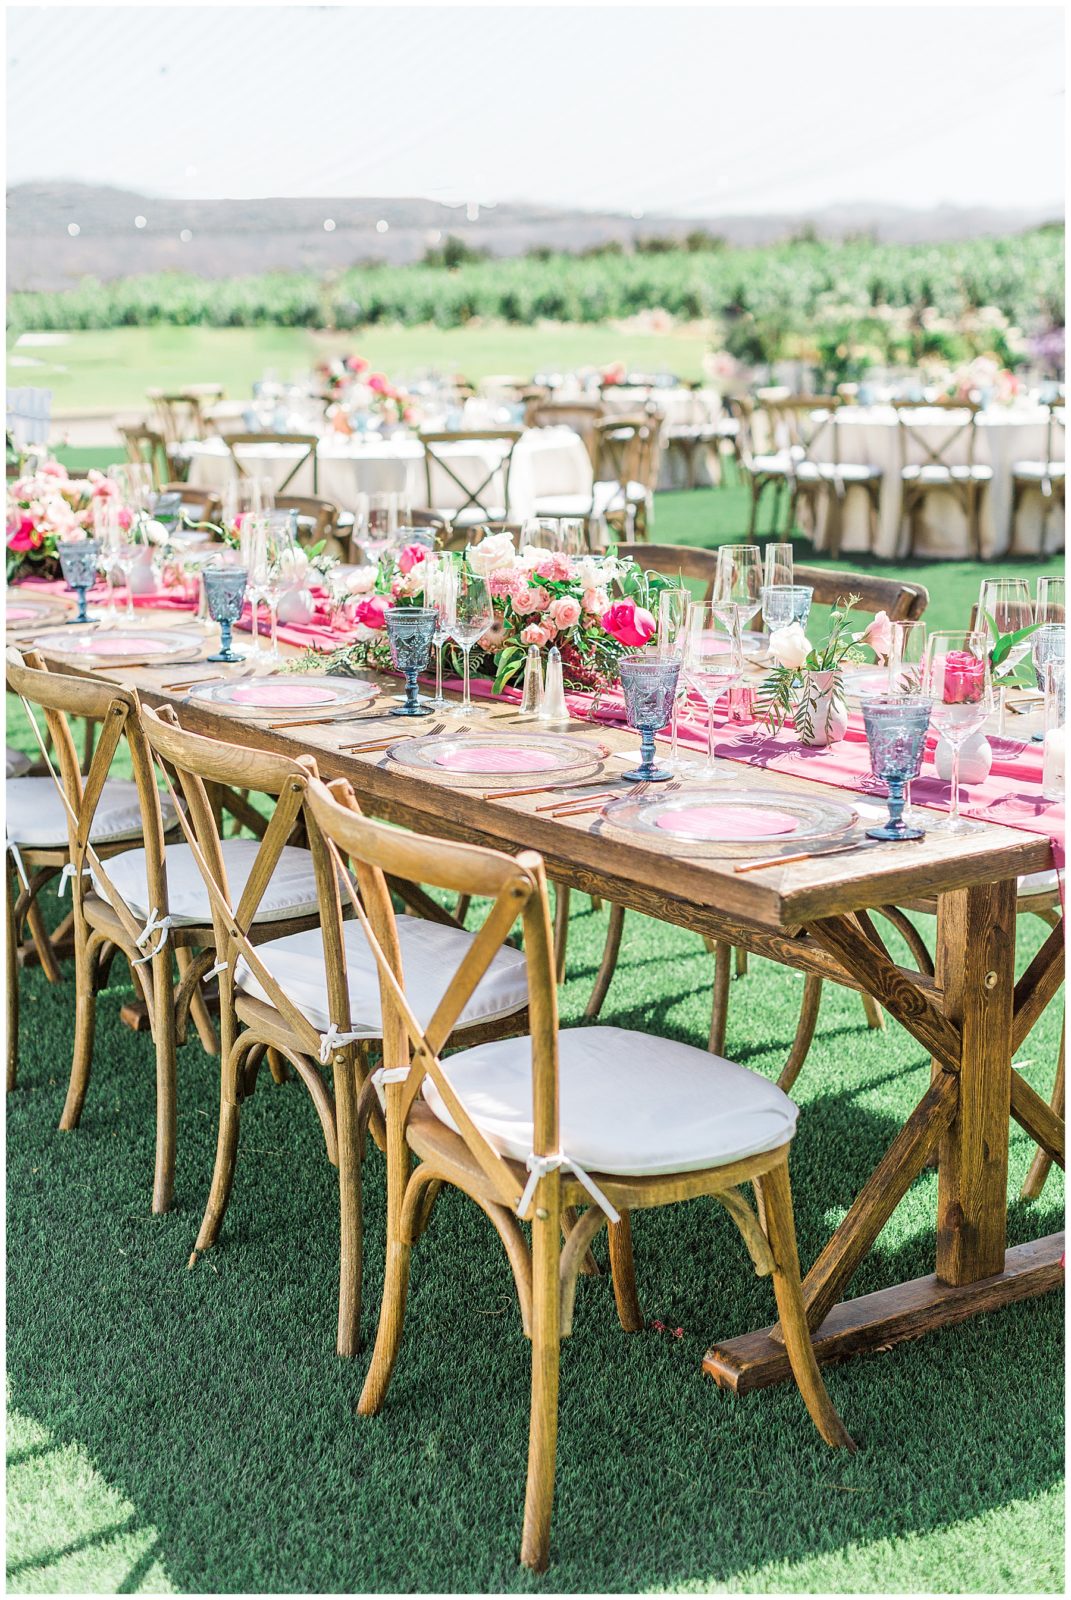 Farmhouse tables with pink runner and blue water glasses